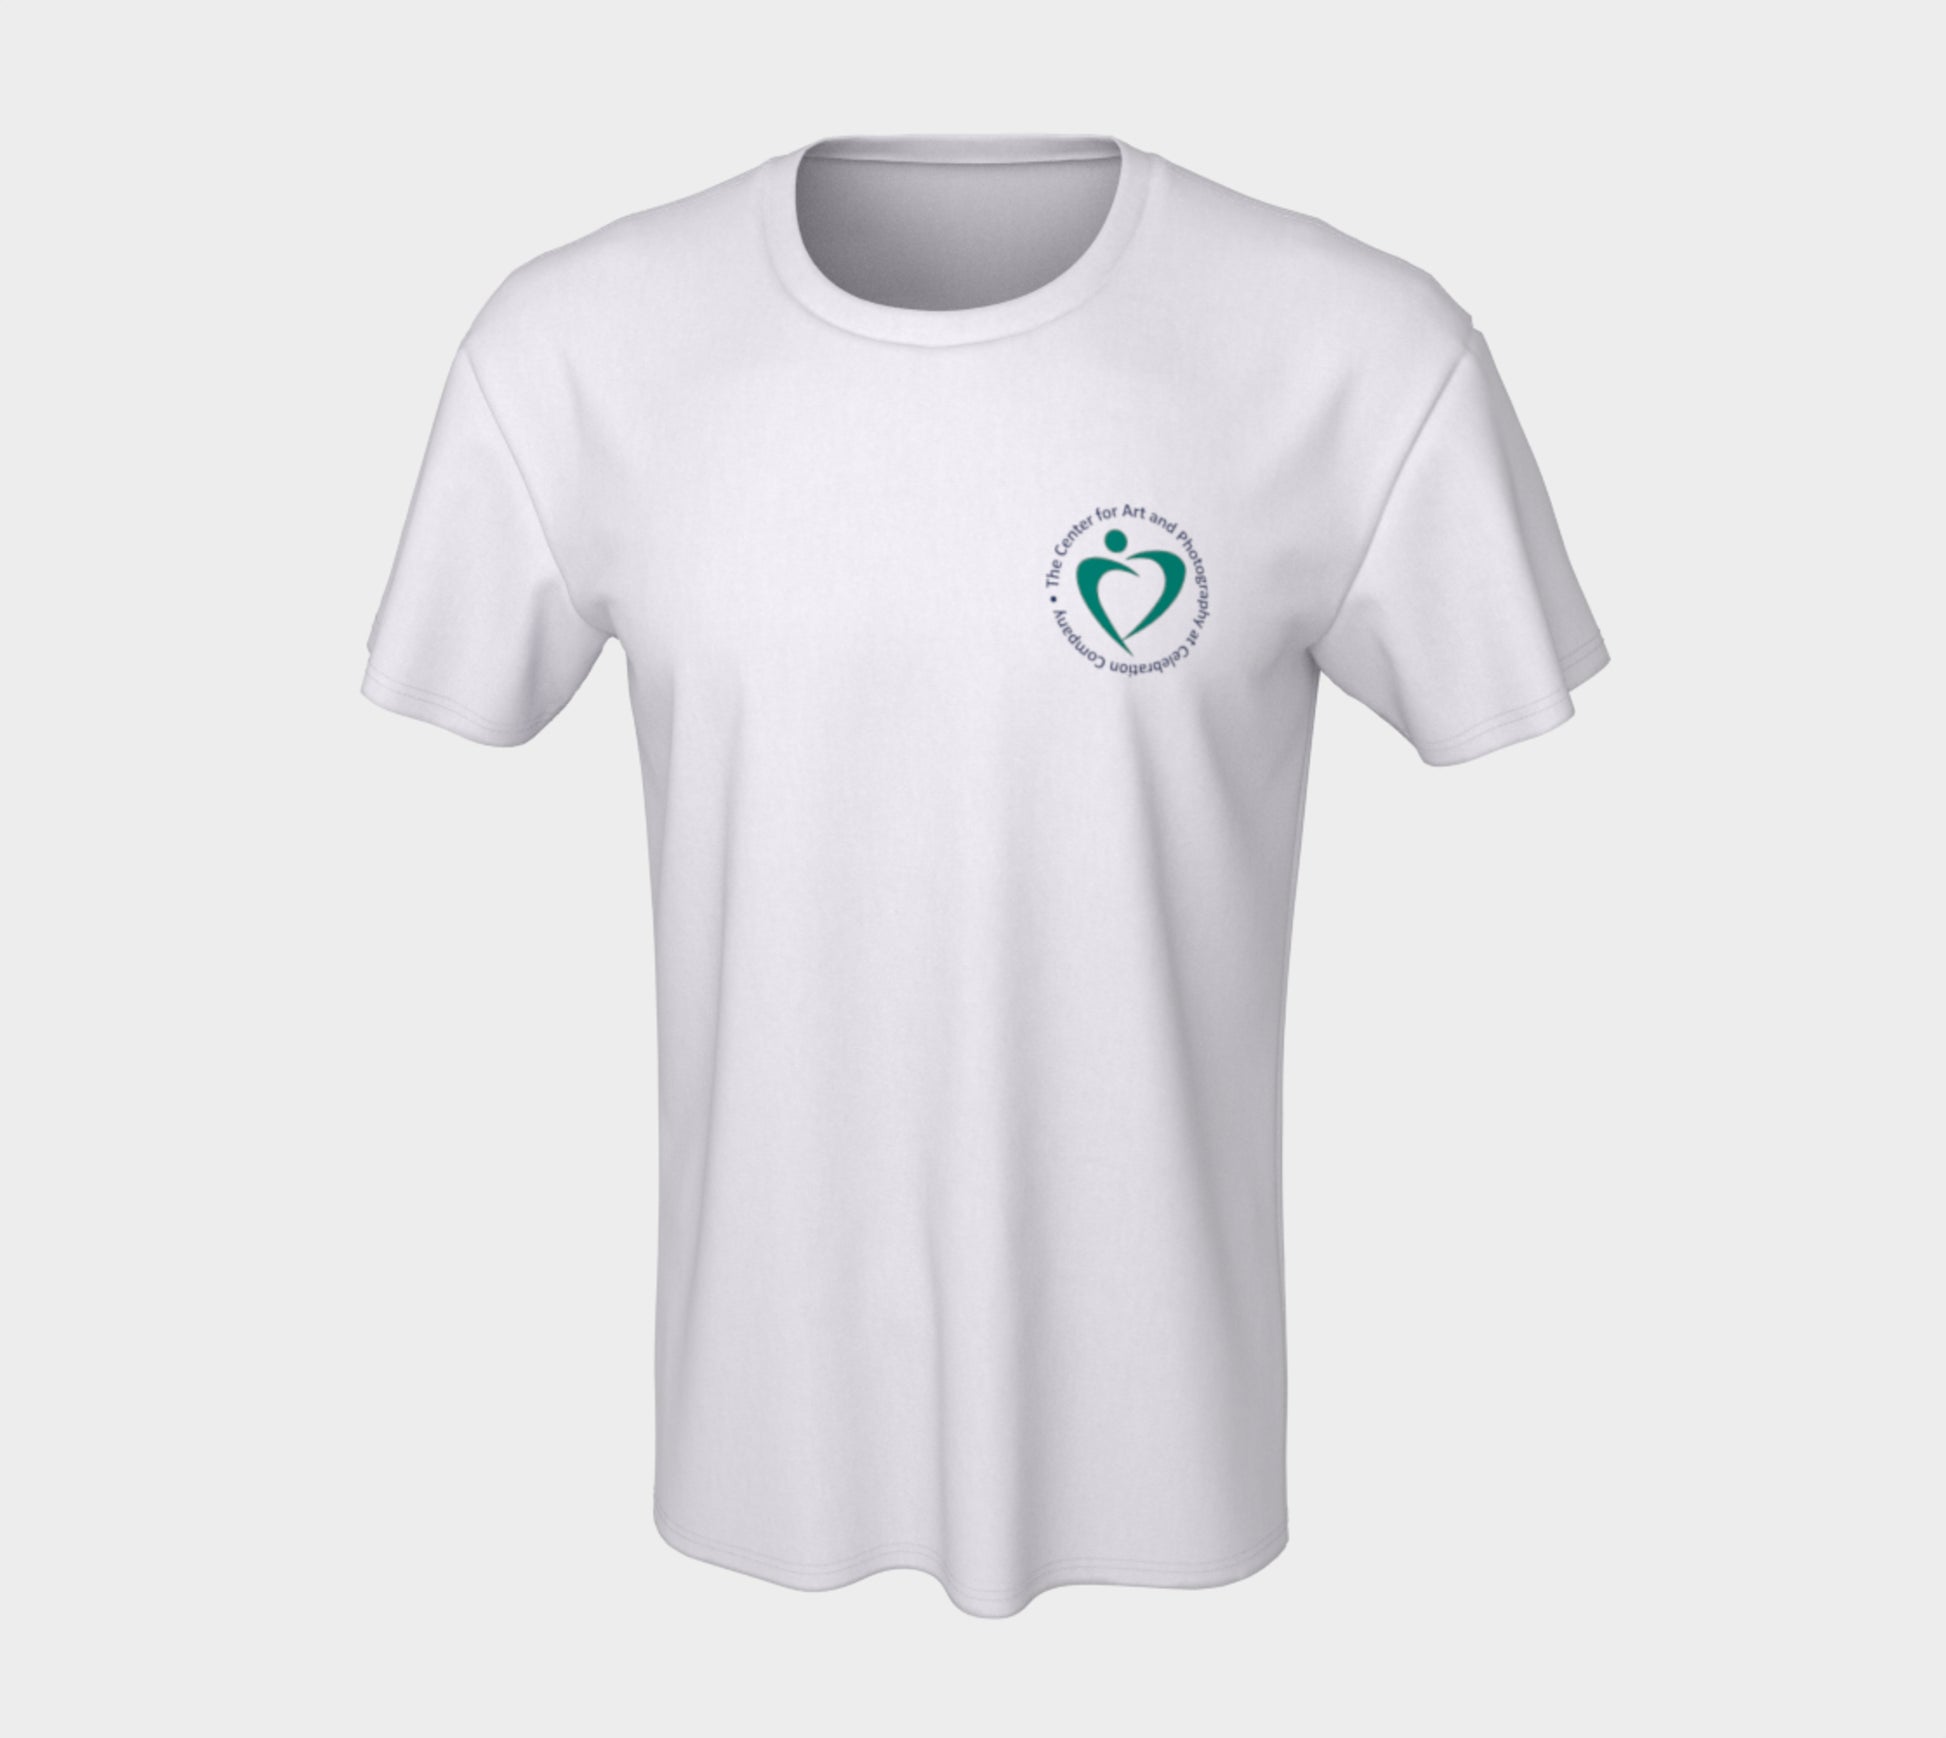 Flat lay view of front of white tshirt showing Celebration Company logo